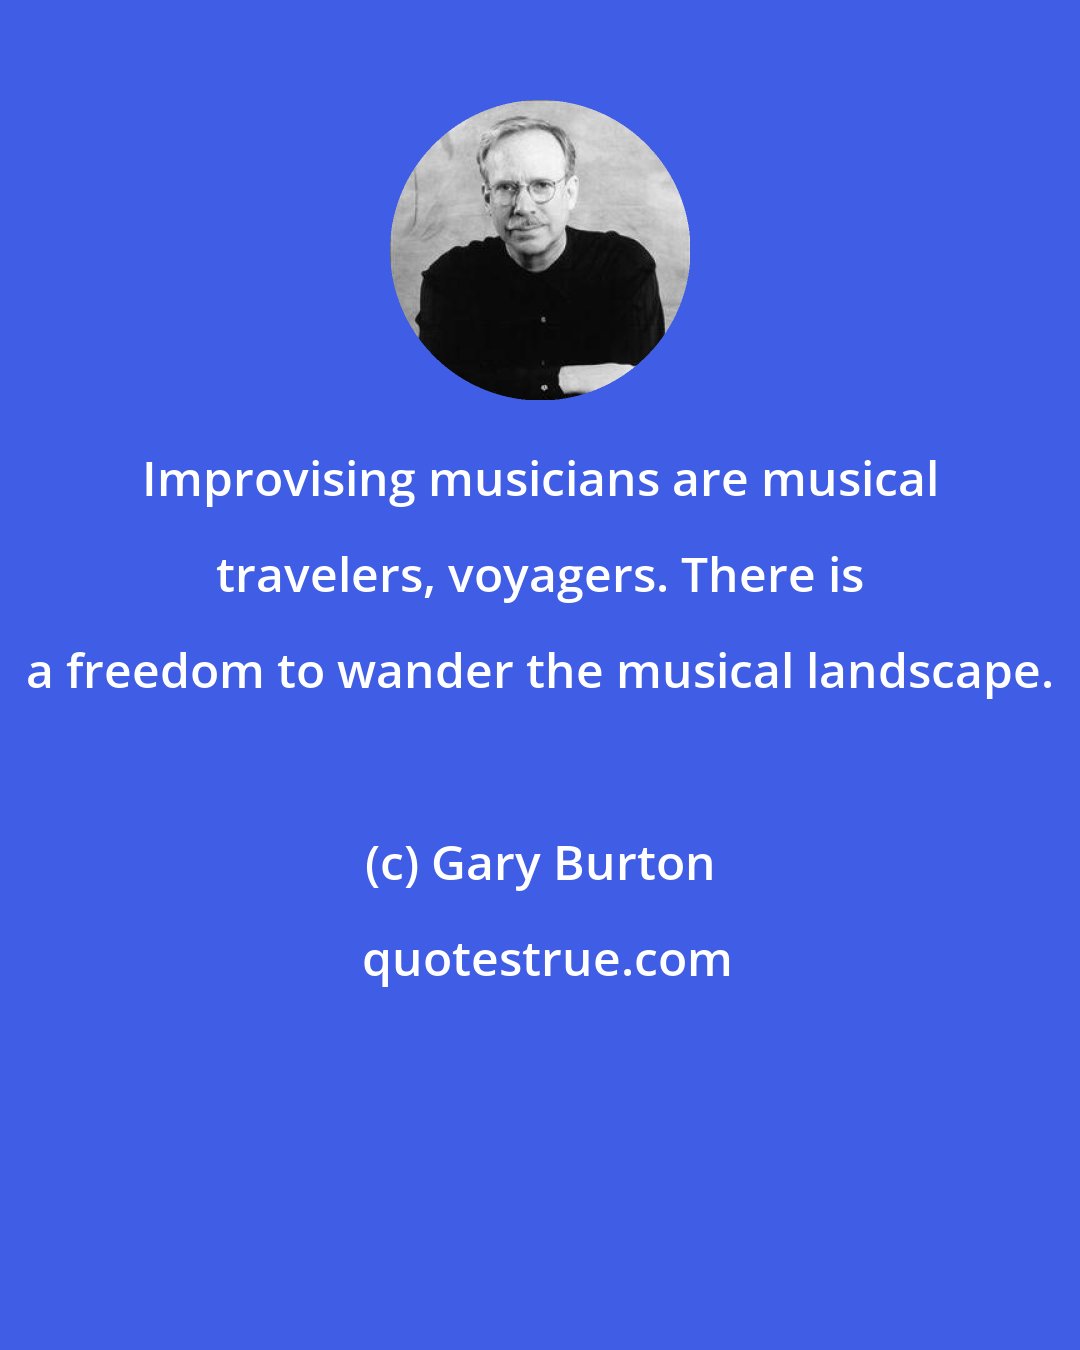 Gary Burton: Improvising musicians are musical travelers, voyagers. There is a freedom to wander the musical landscape.